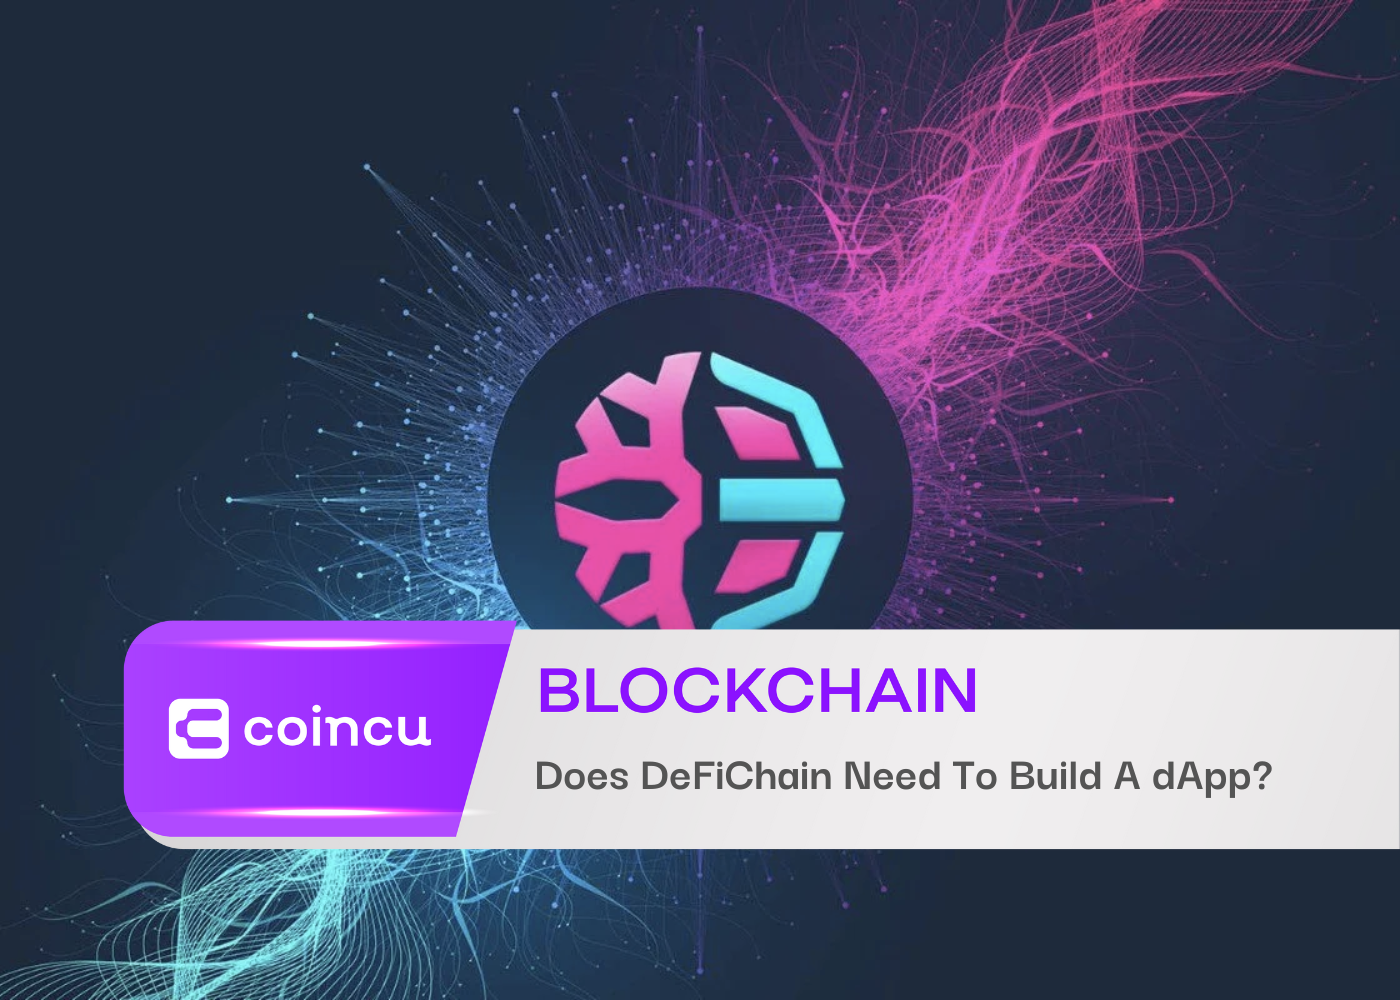 Does DeFiChain Need To Build A dApp?